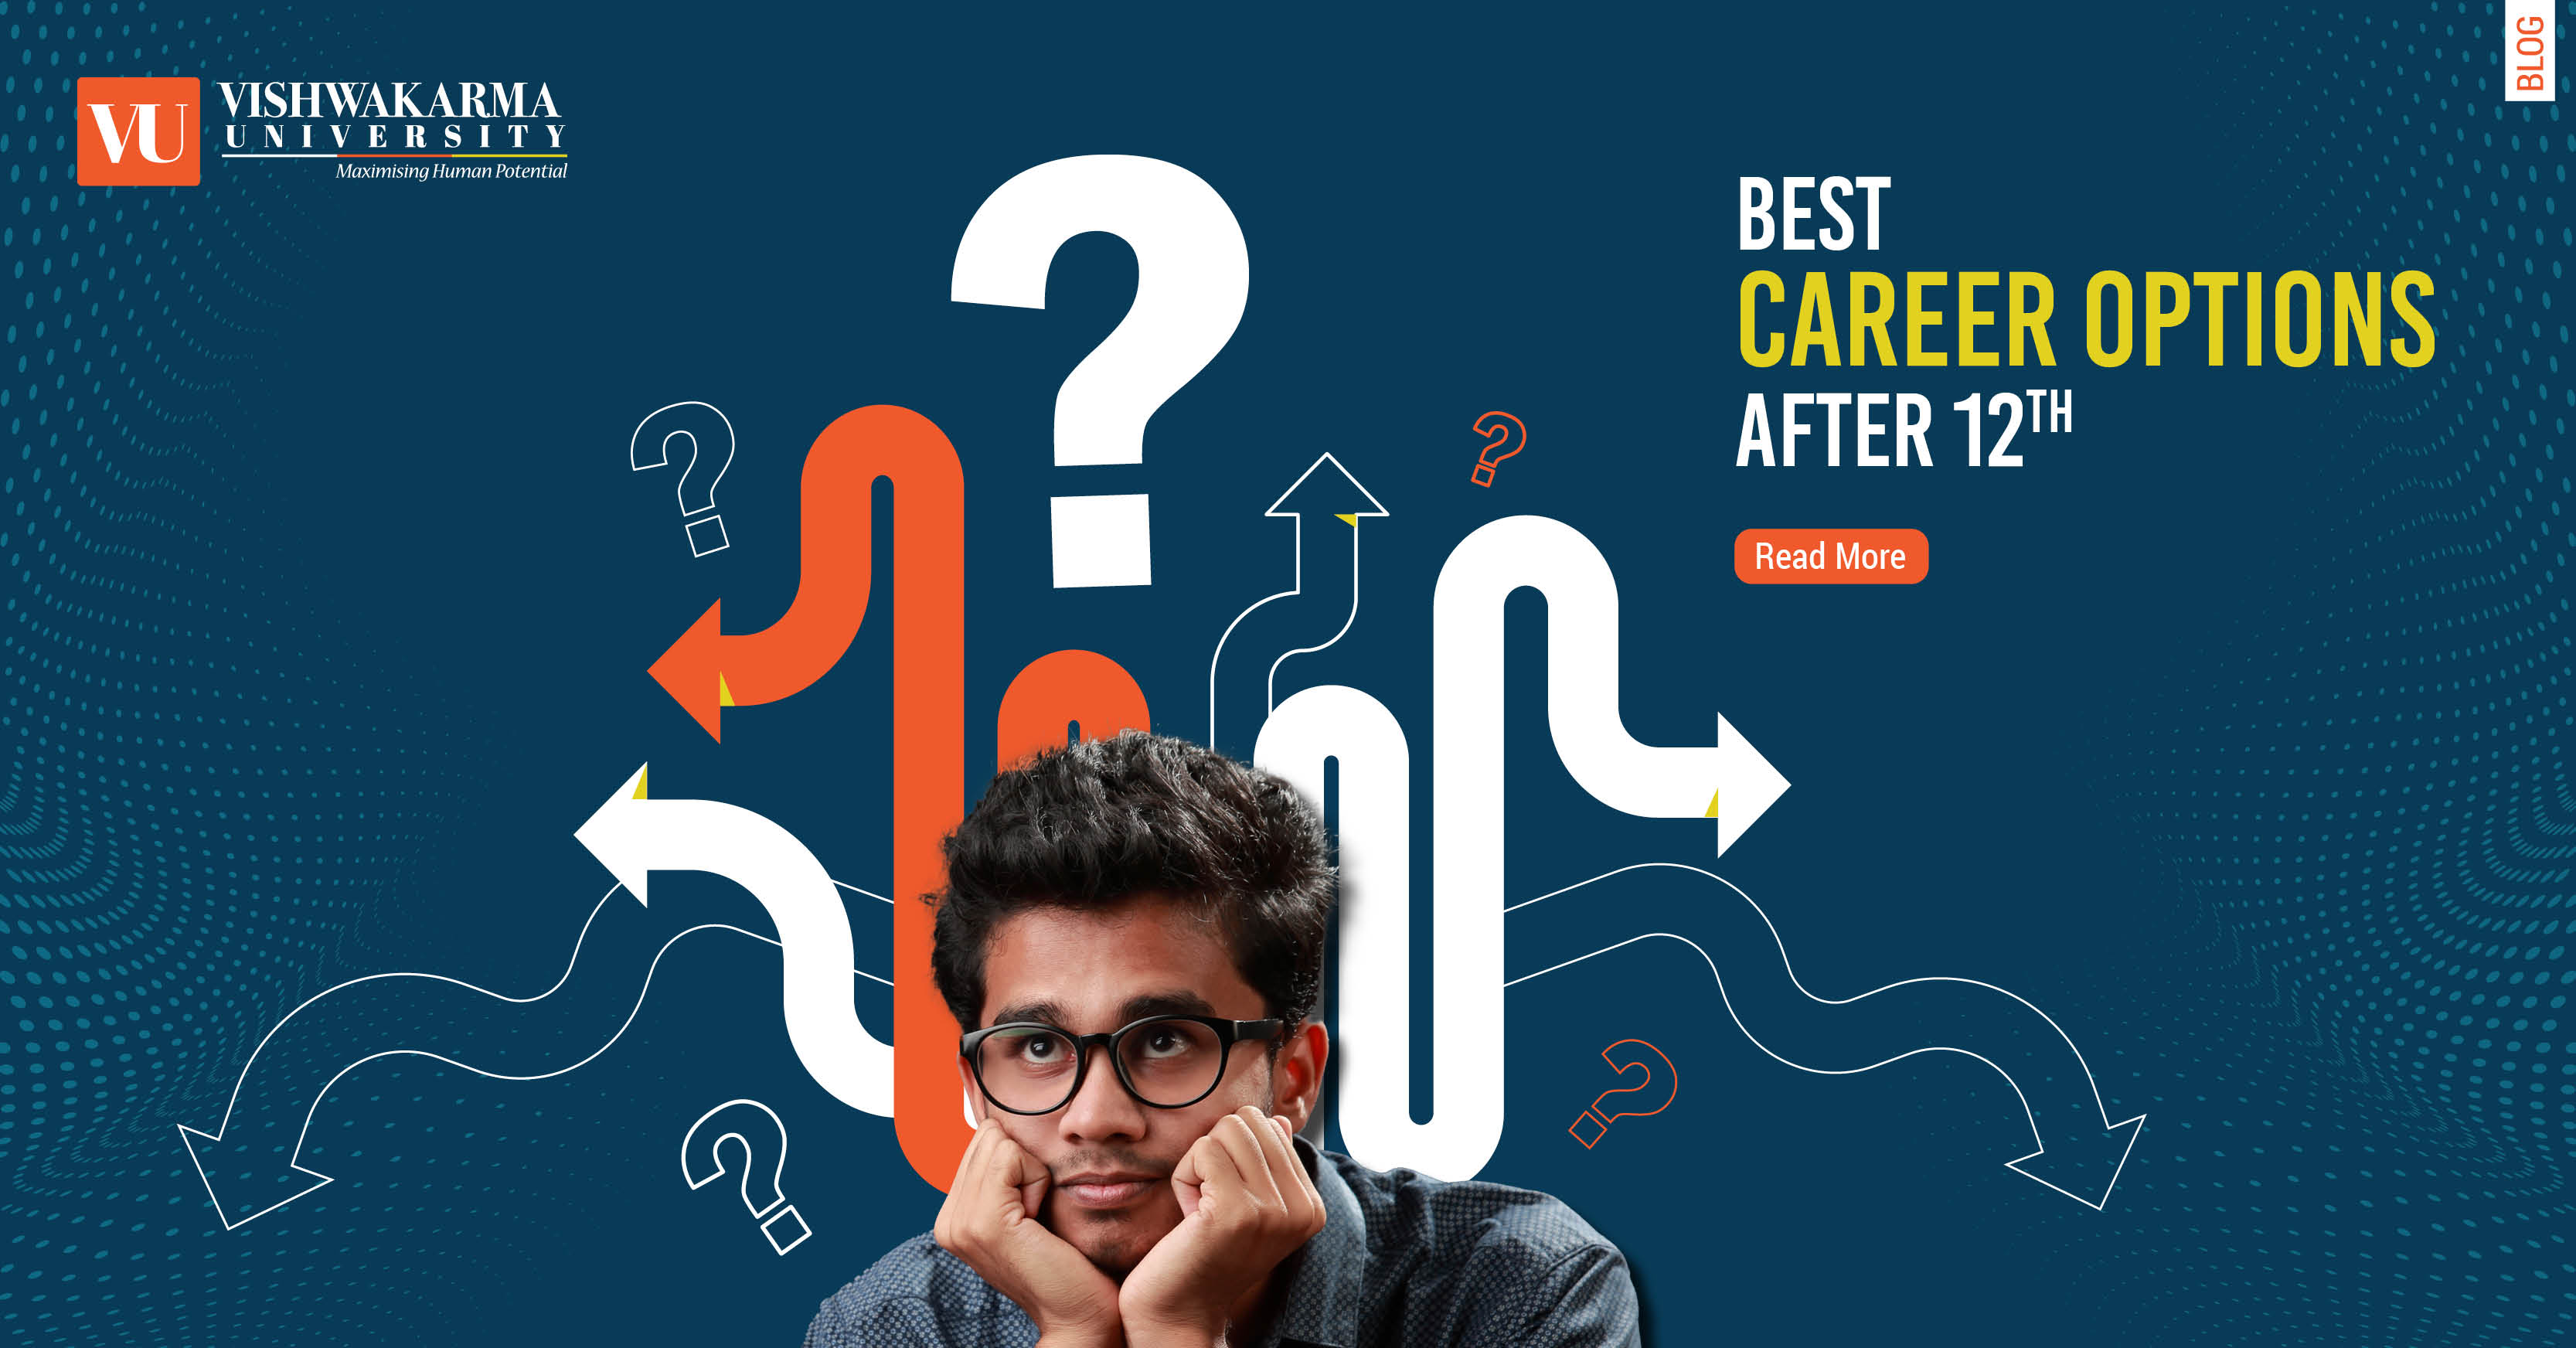 Career Options for Students After 12th in Pune. 2